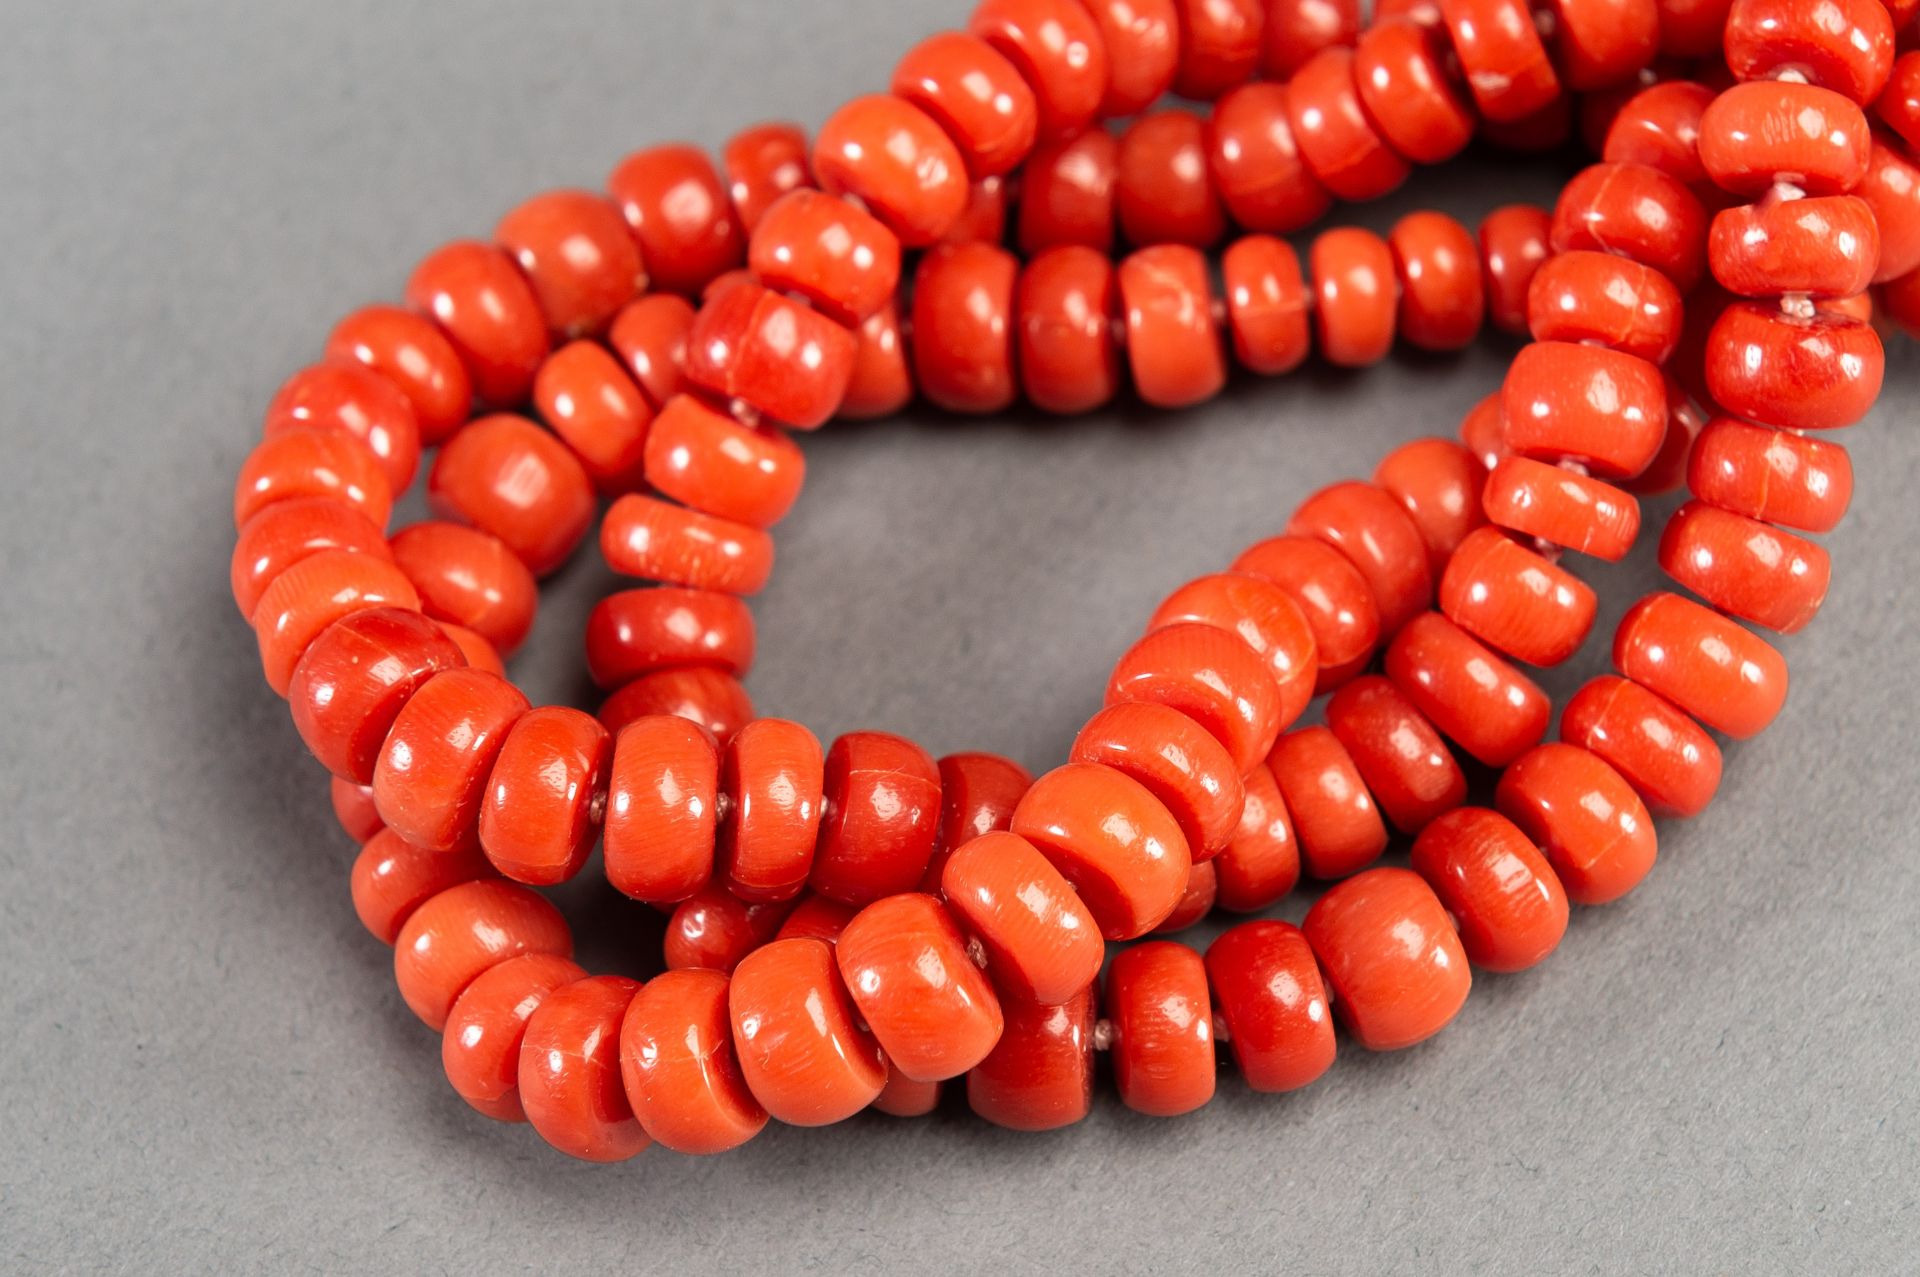 A THREE-TIERED MOMO CORAL BEAD NECKLACE - Image 2 of 8